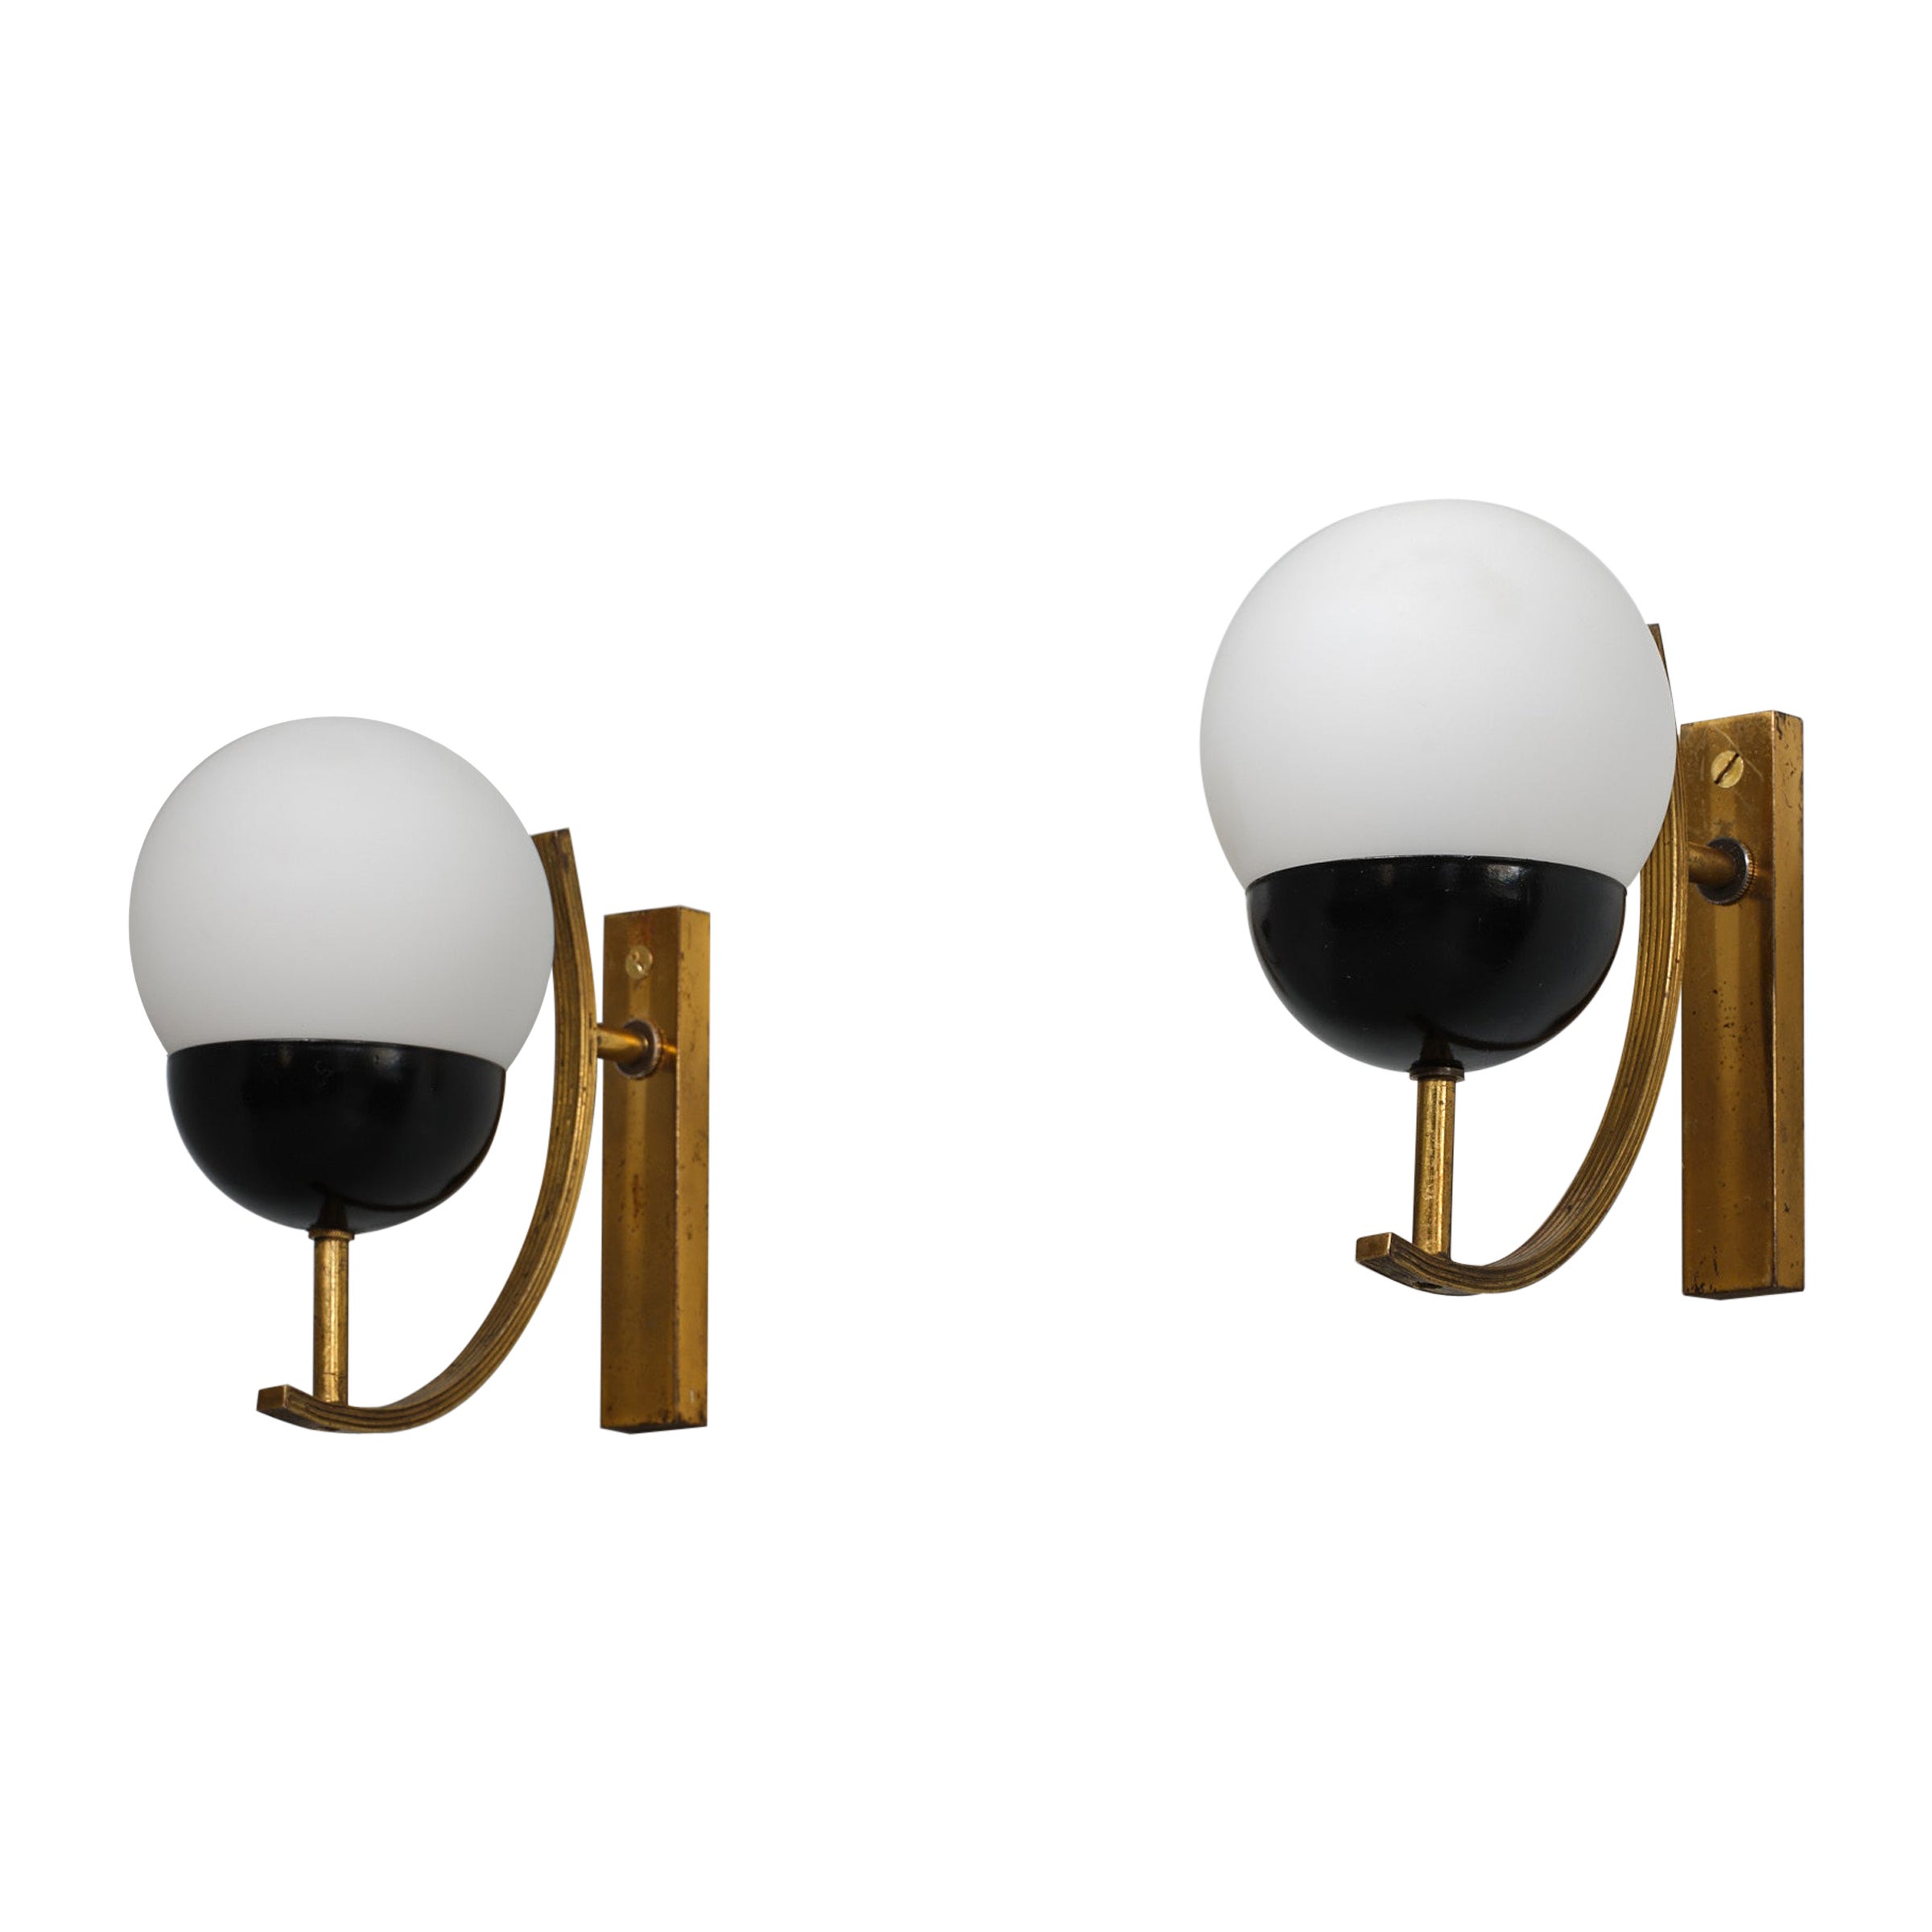 Pair of Mid-Century Italian Brass and Black Metal Wall Sconces, 1950s